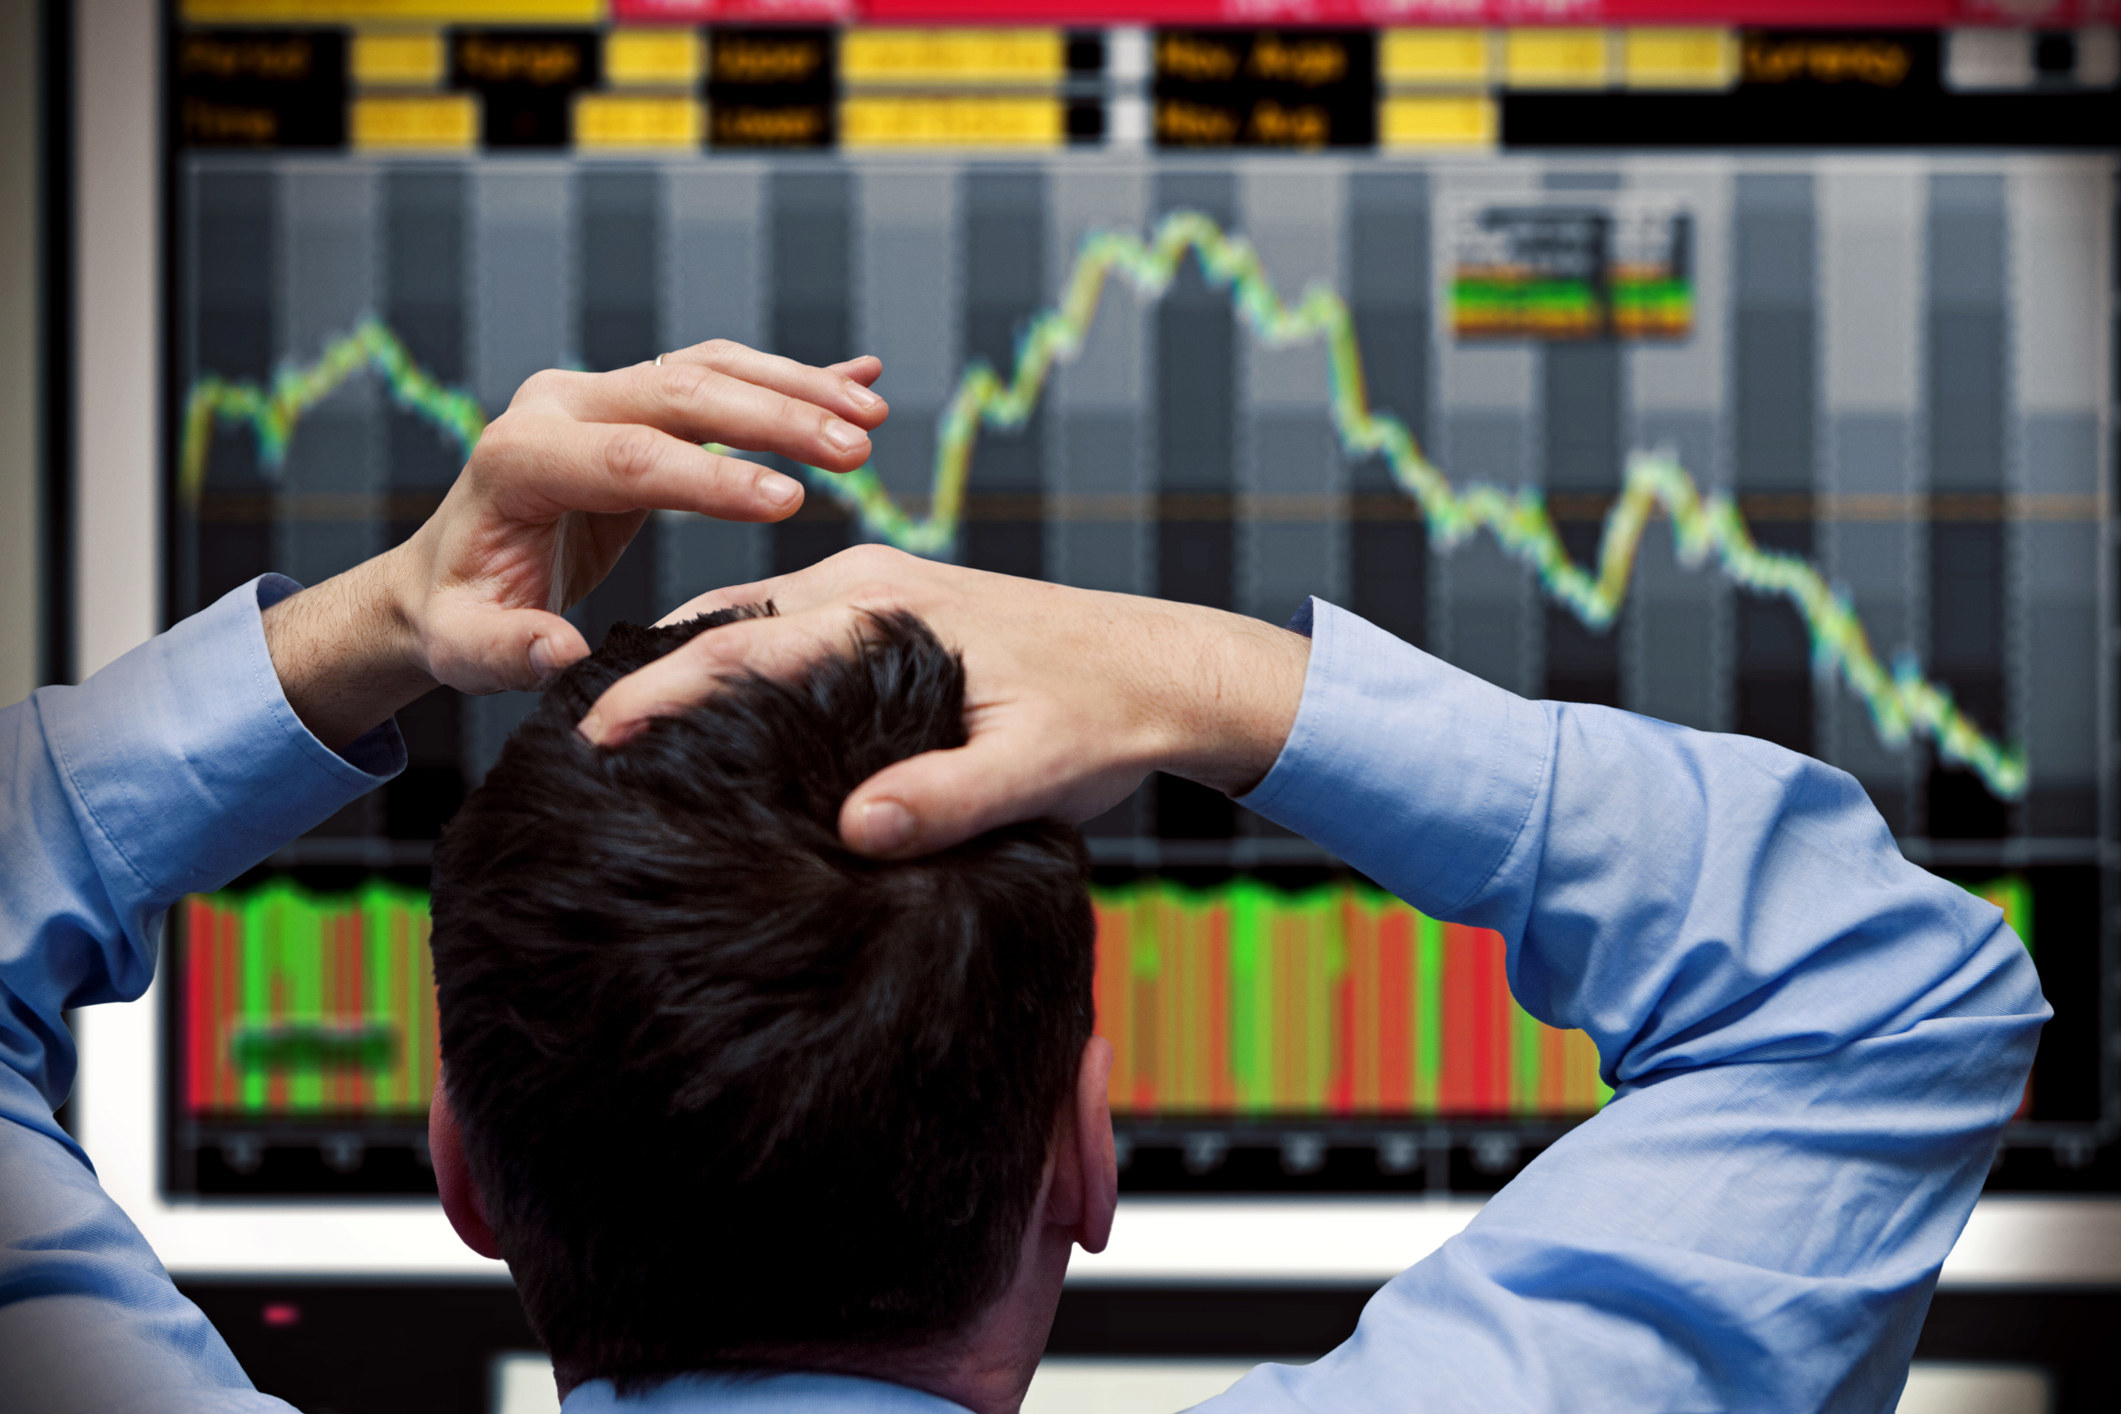 A man clutches his head in frustration while watching stock prices plummet